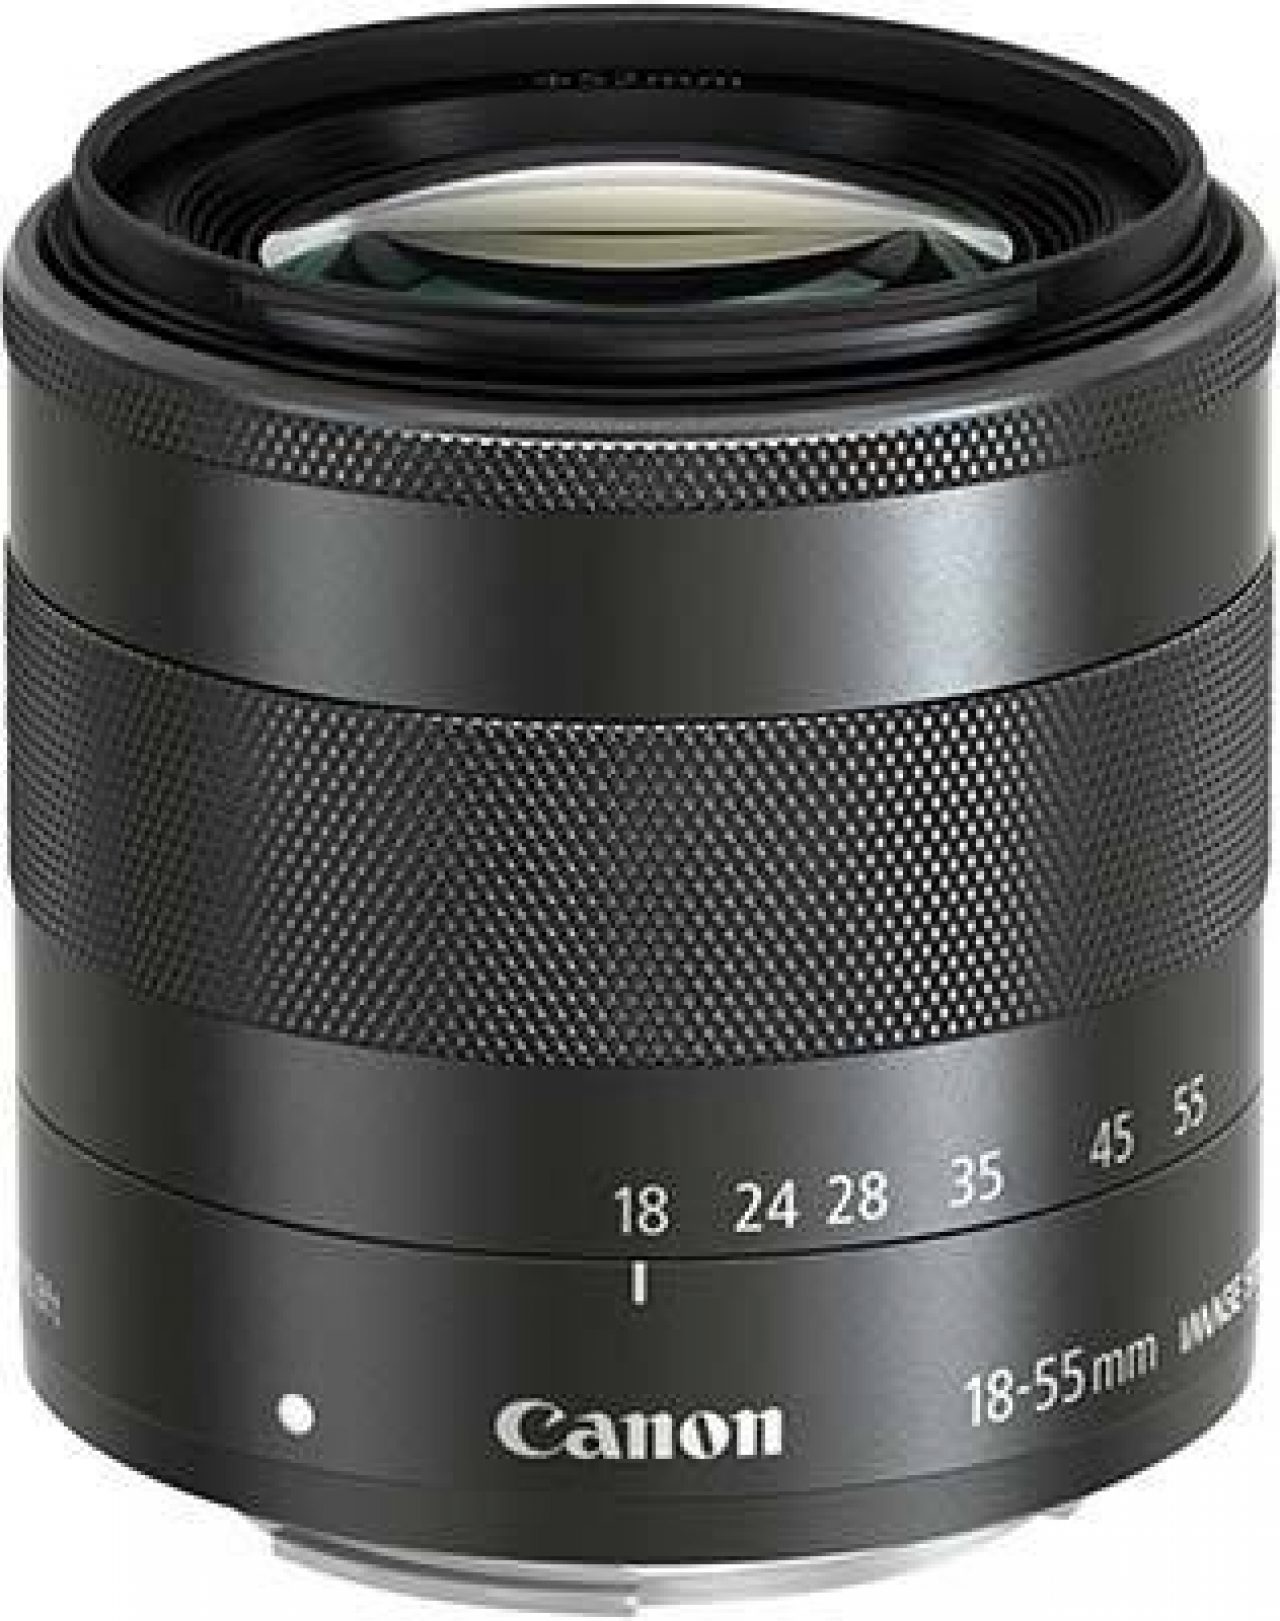 Canon EF-M 18-55mm f/3.5-5.6 IS STM Review | Photography Blog